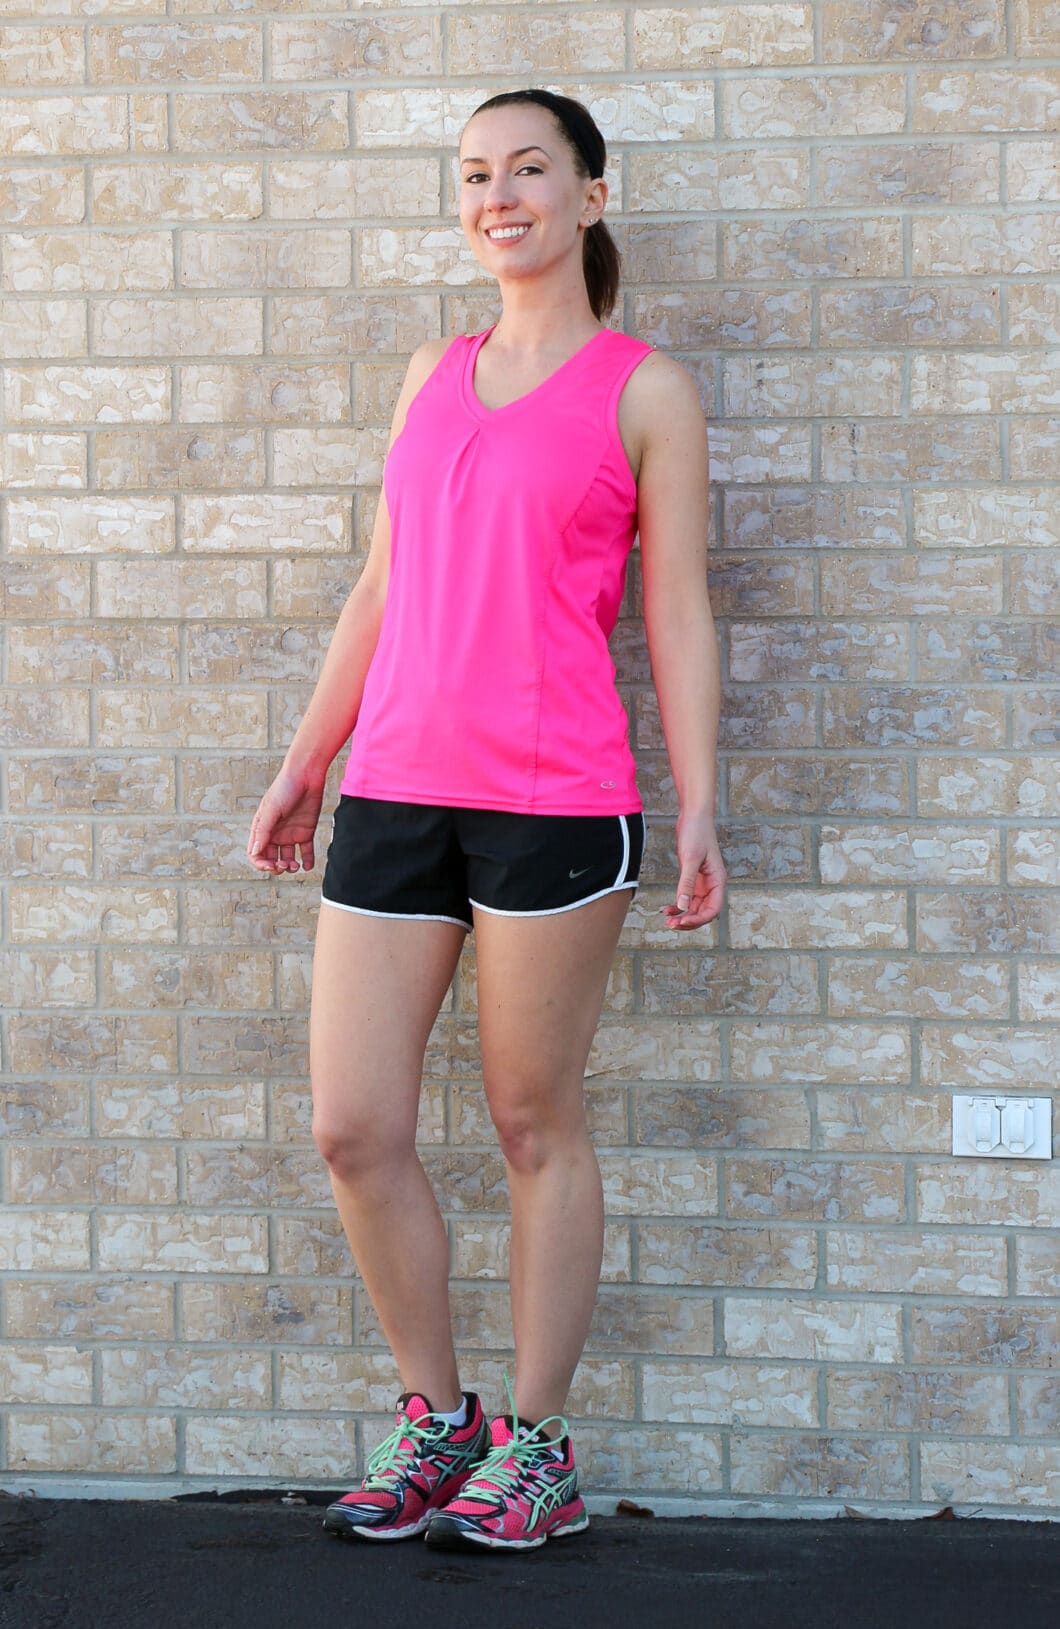 Warm weather running outfit